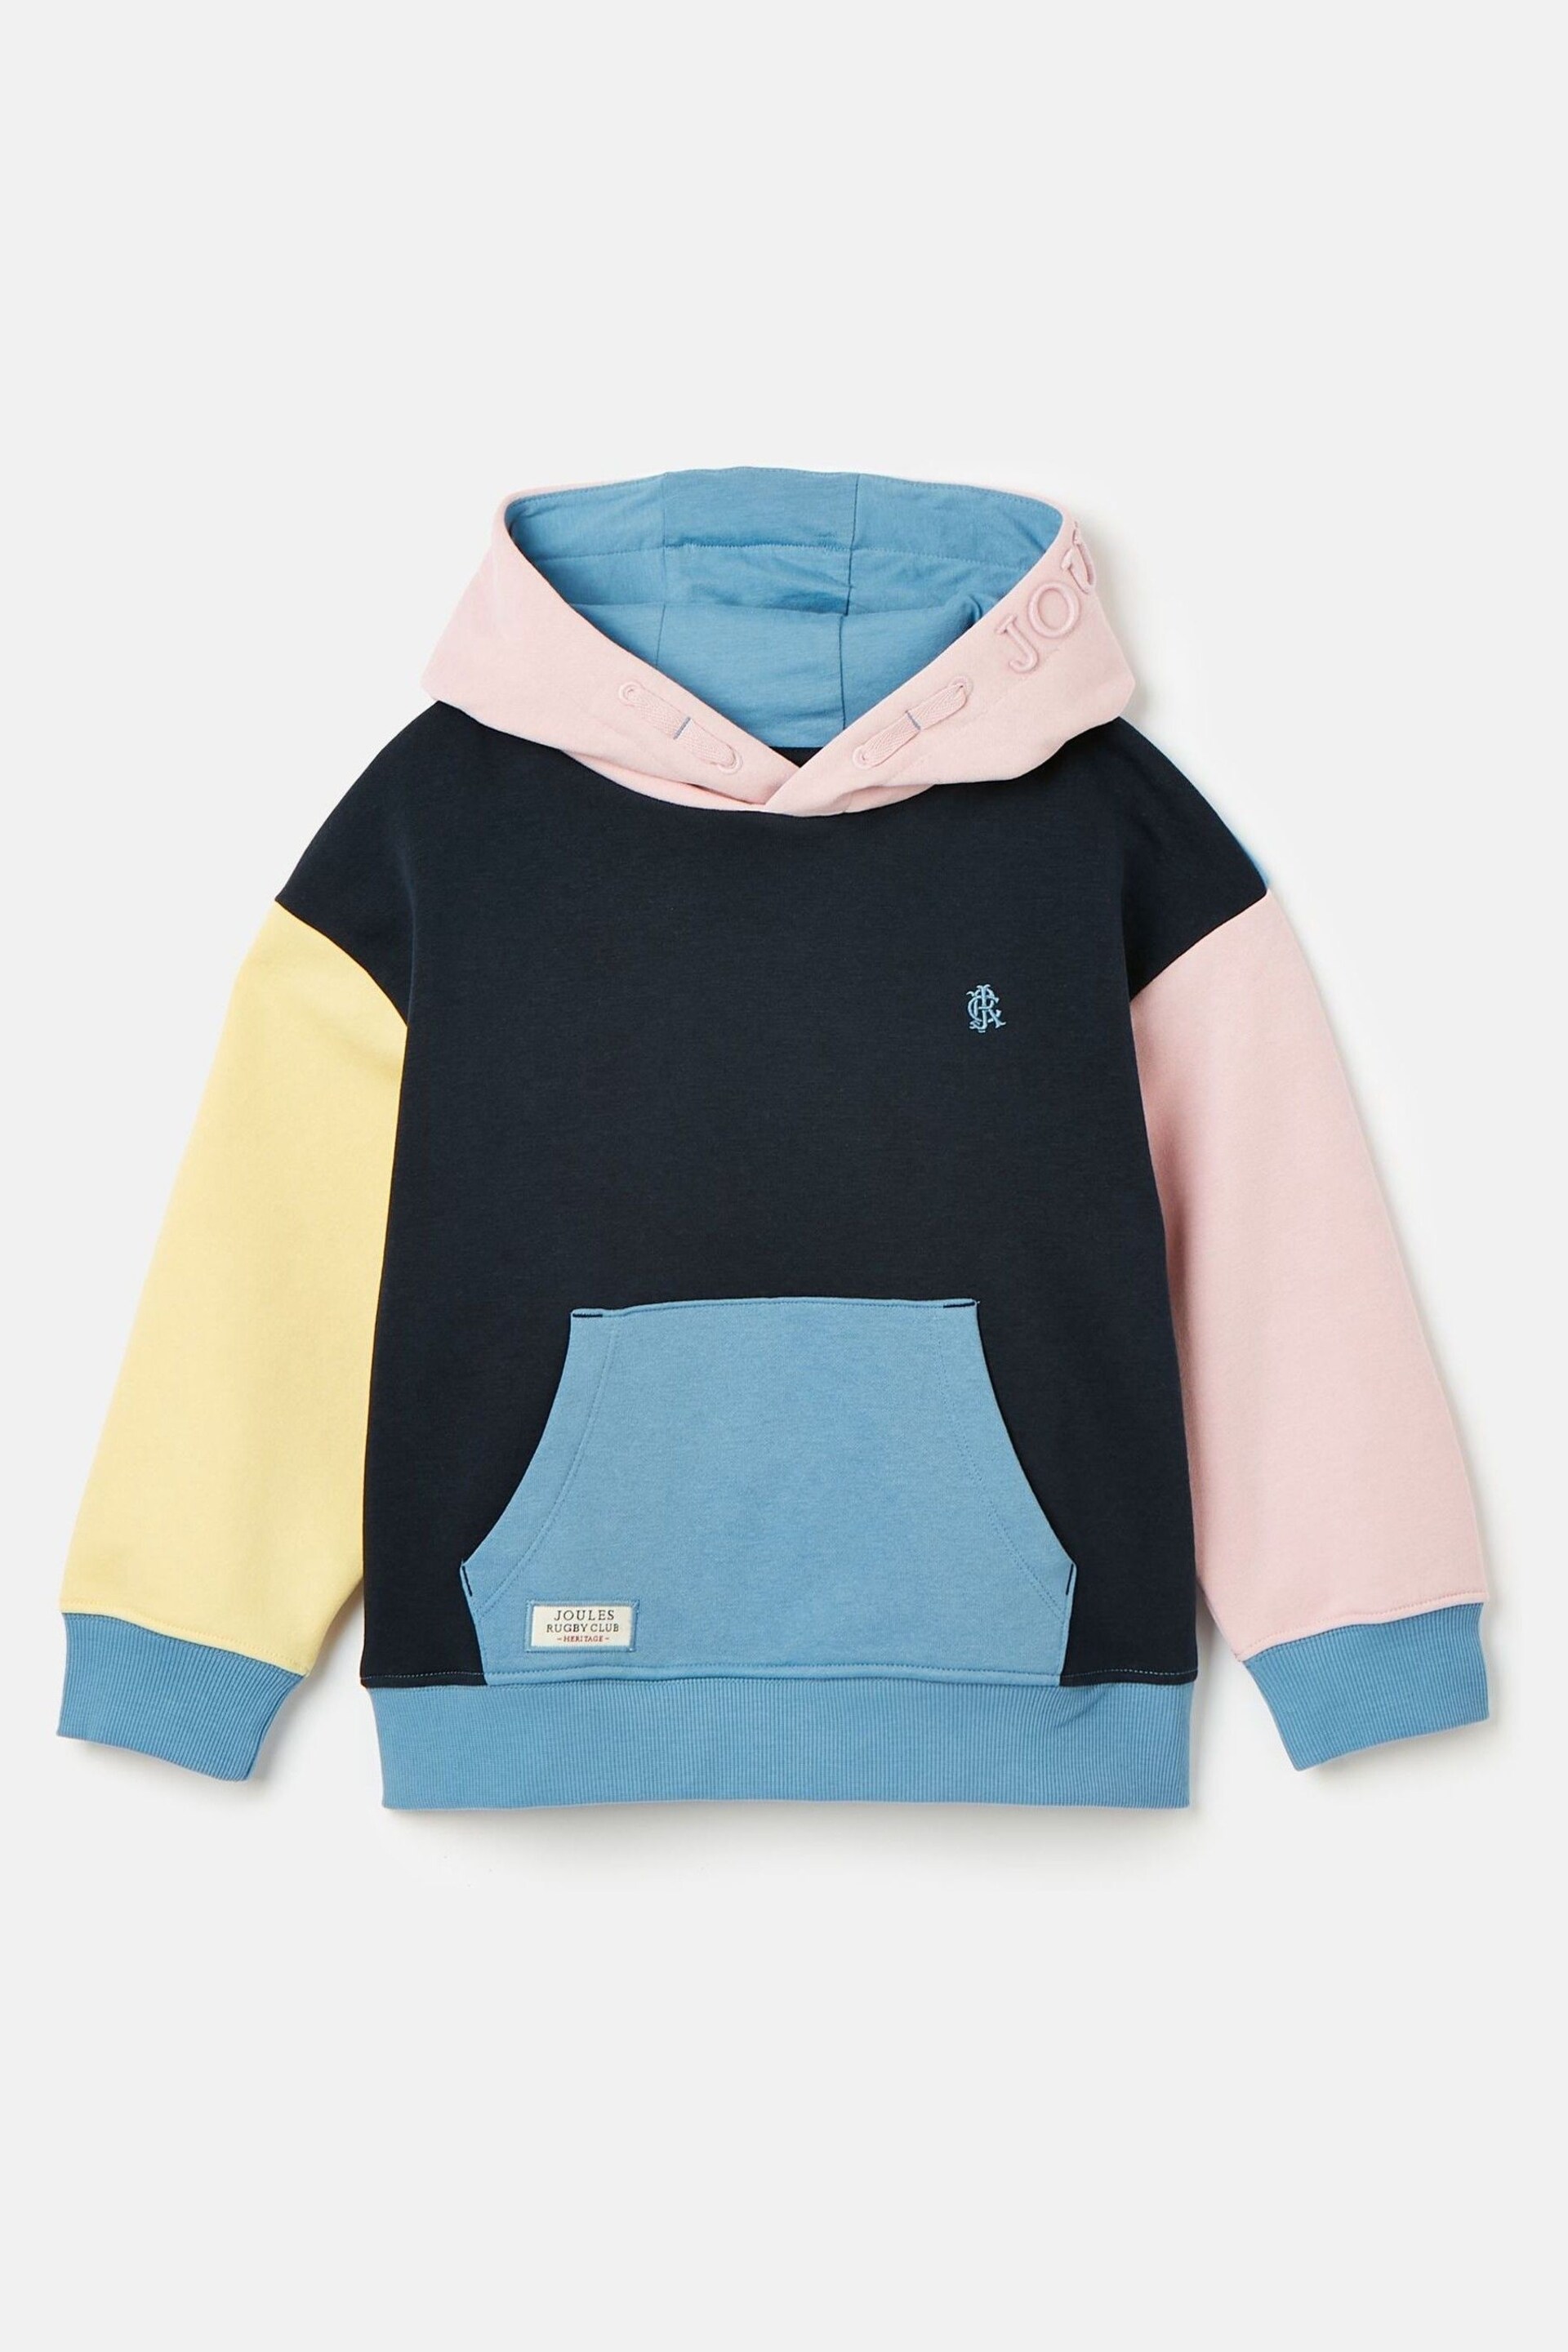 Joules Parkside Colour Block Hoodie With Pocket - Image 1 of 5